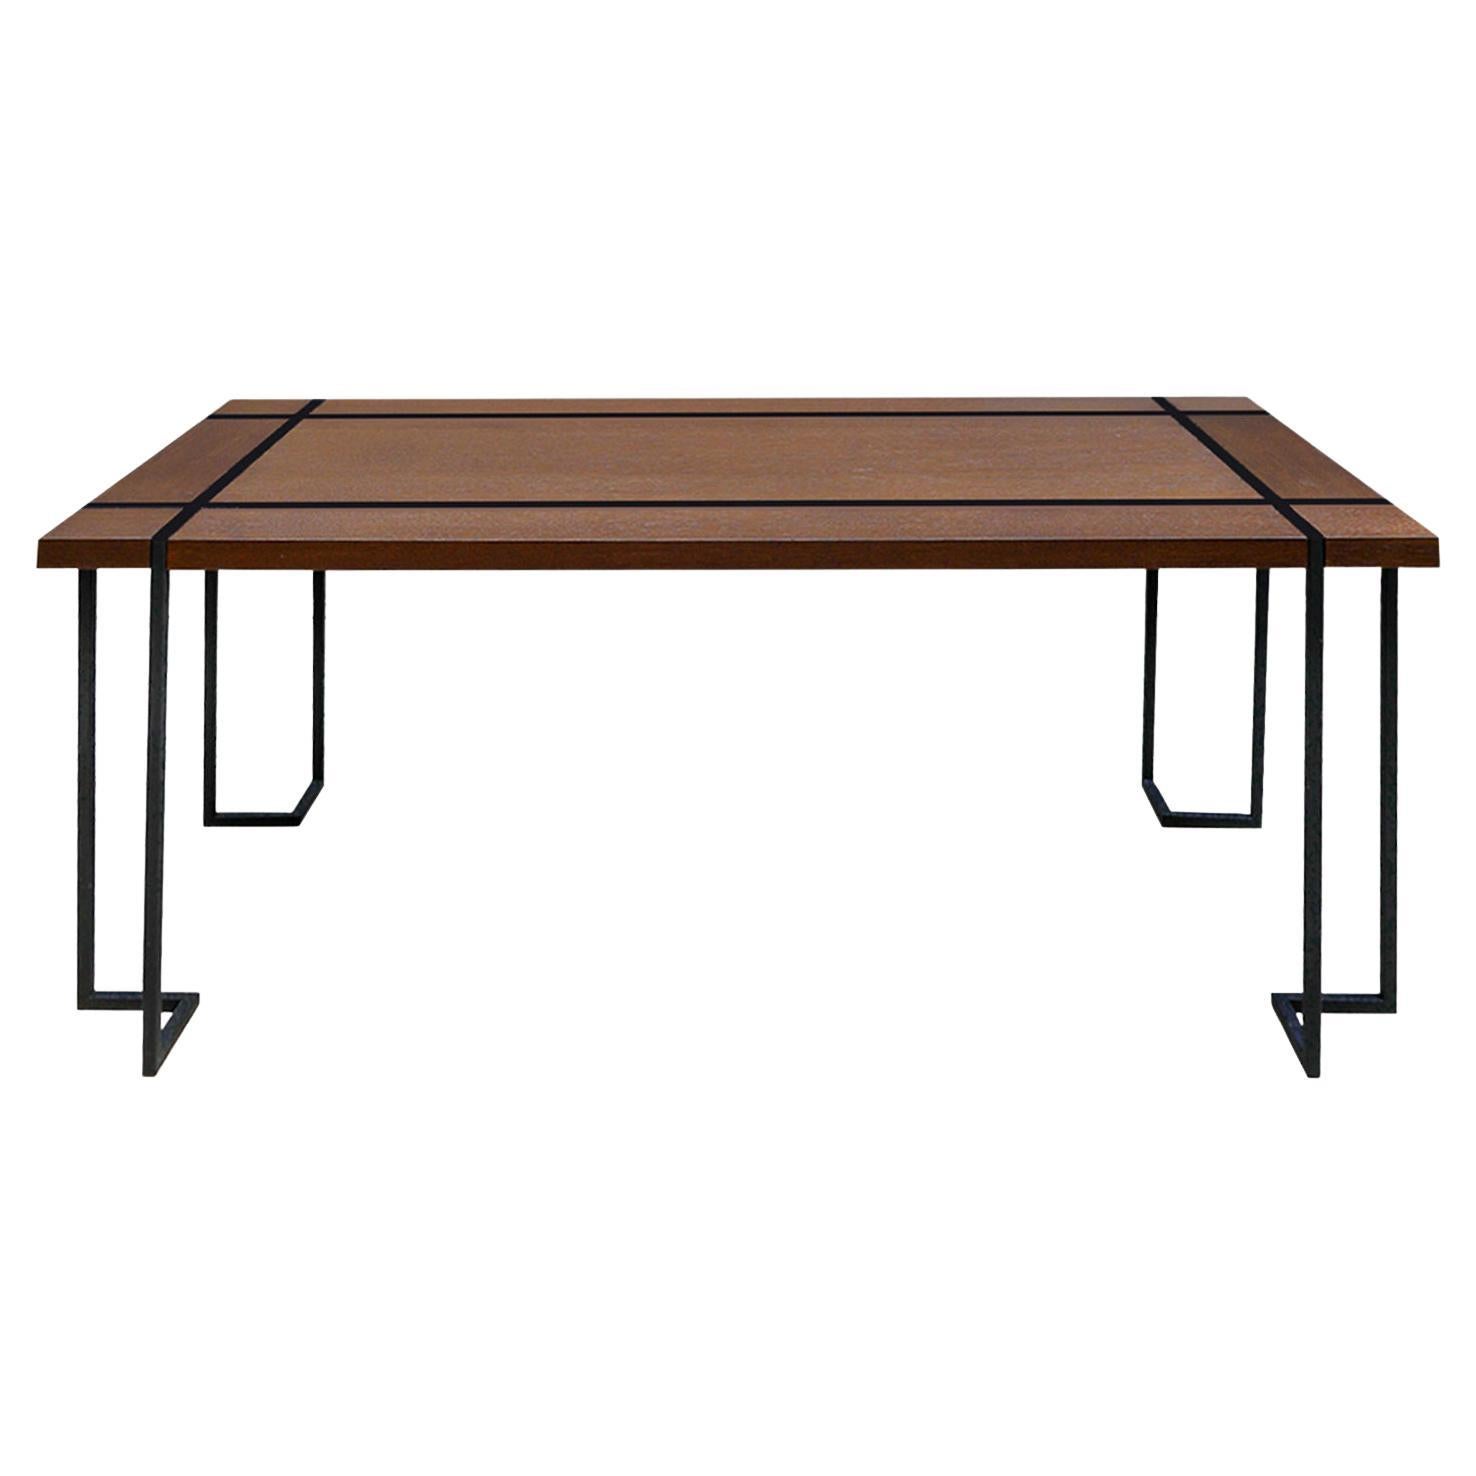 Revealing all the beauty of dark wood with the black line detail intersecting at the corners, RIBBON TABLE accompanies your most enjoyable moments with your family...

Width: 78.7'' / Depth: 39.4'' / Height: 29.5'' 
Weight: 42.7 kg

-Dark Oak Plated